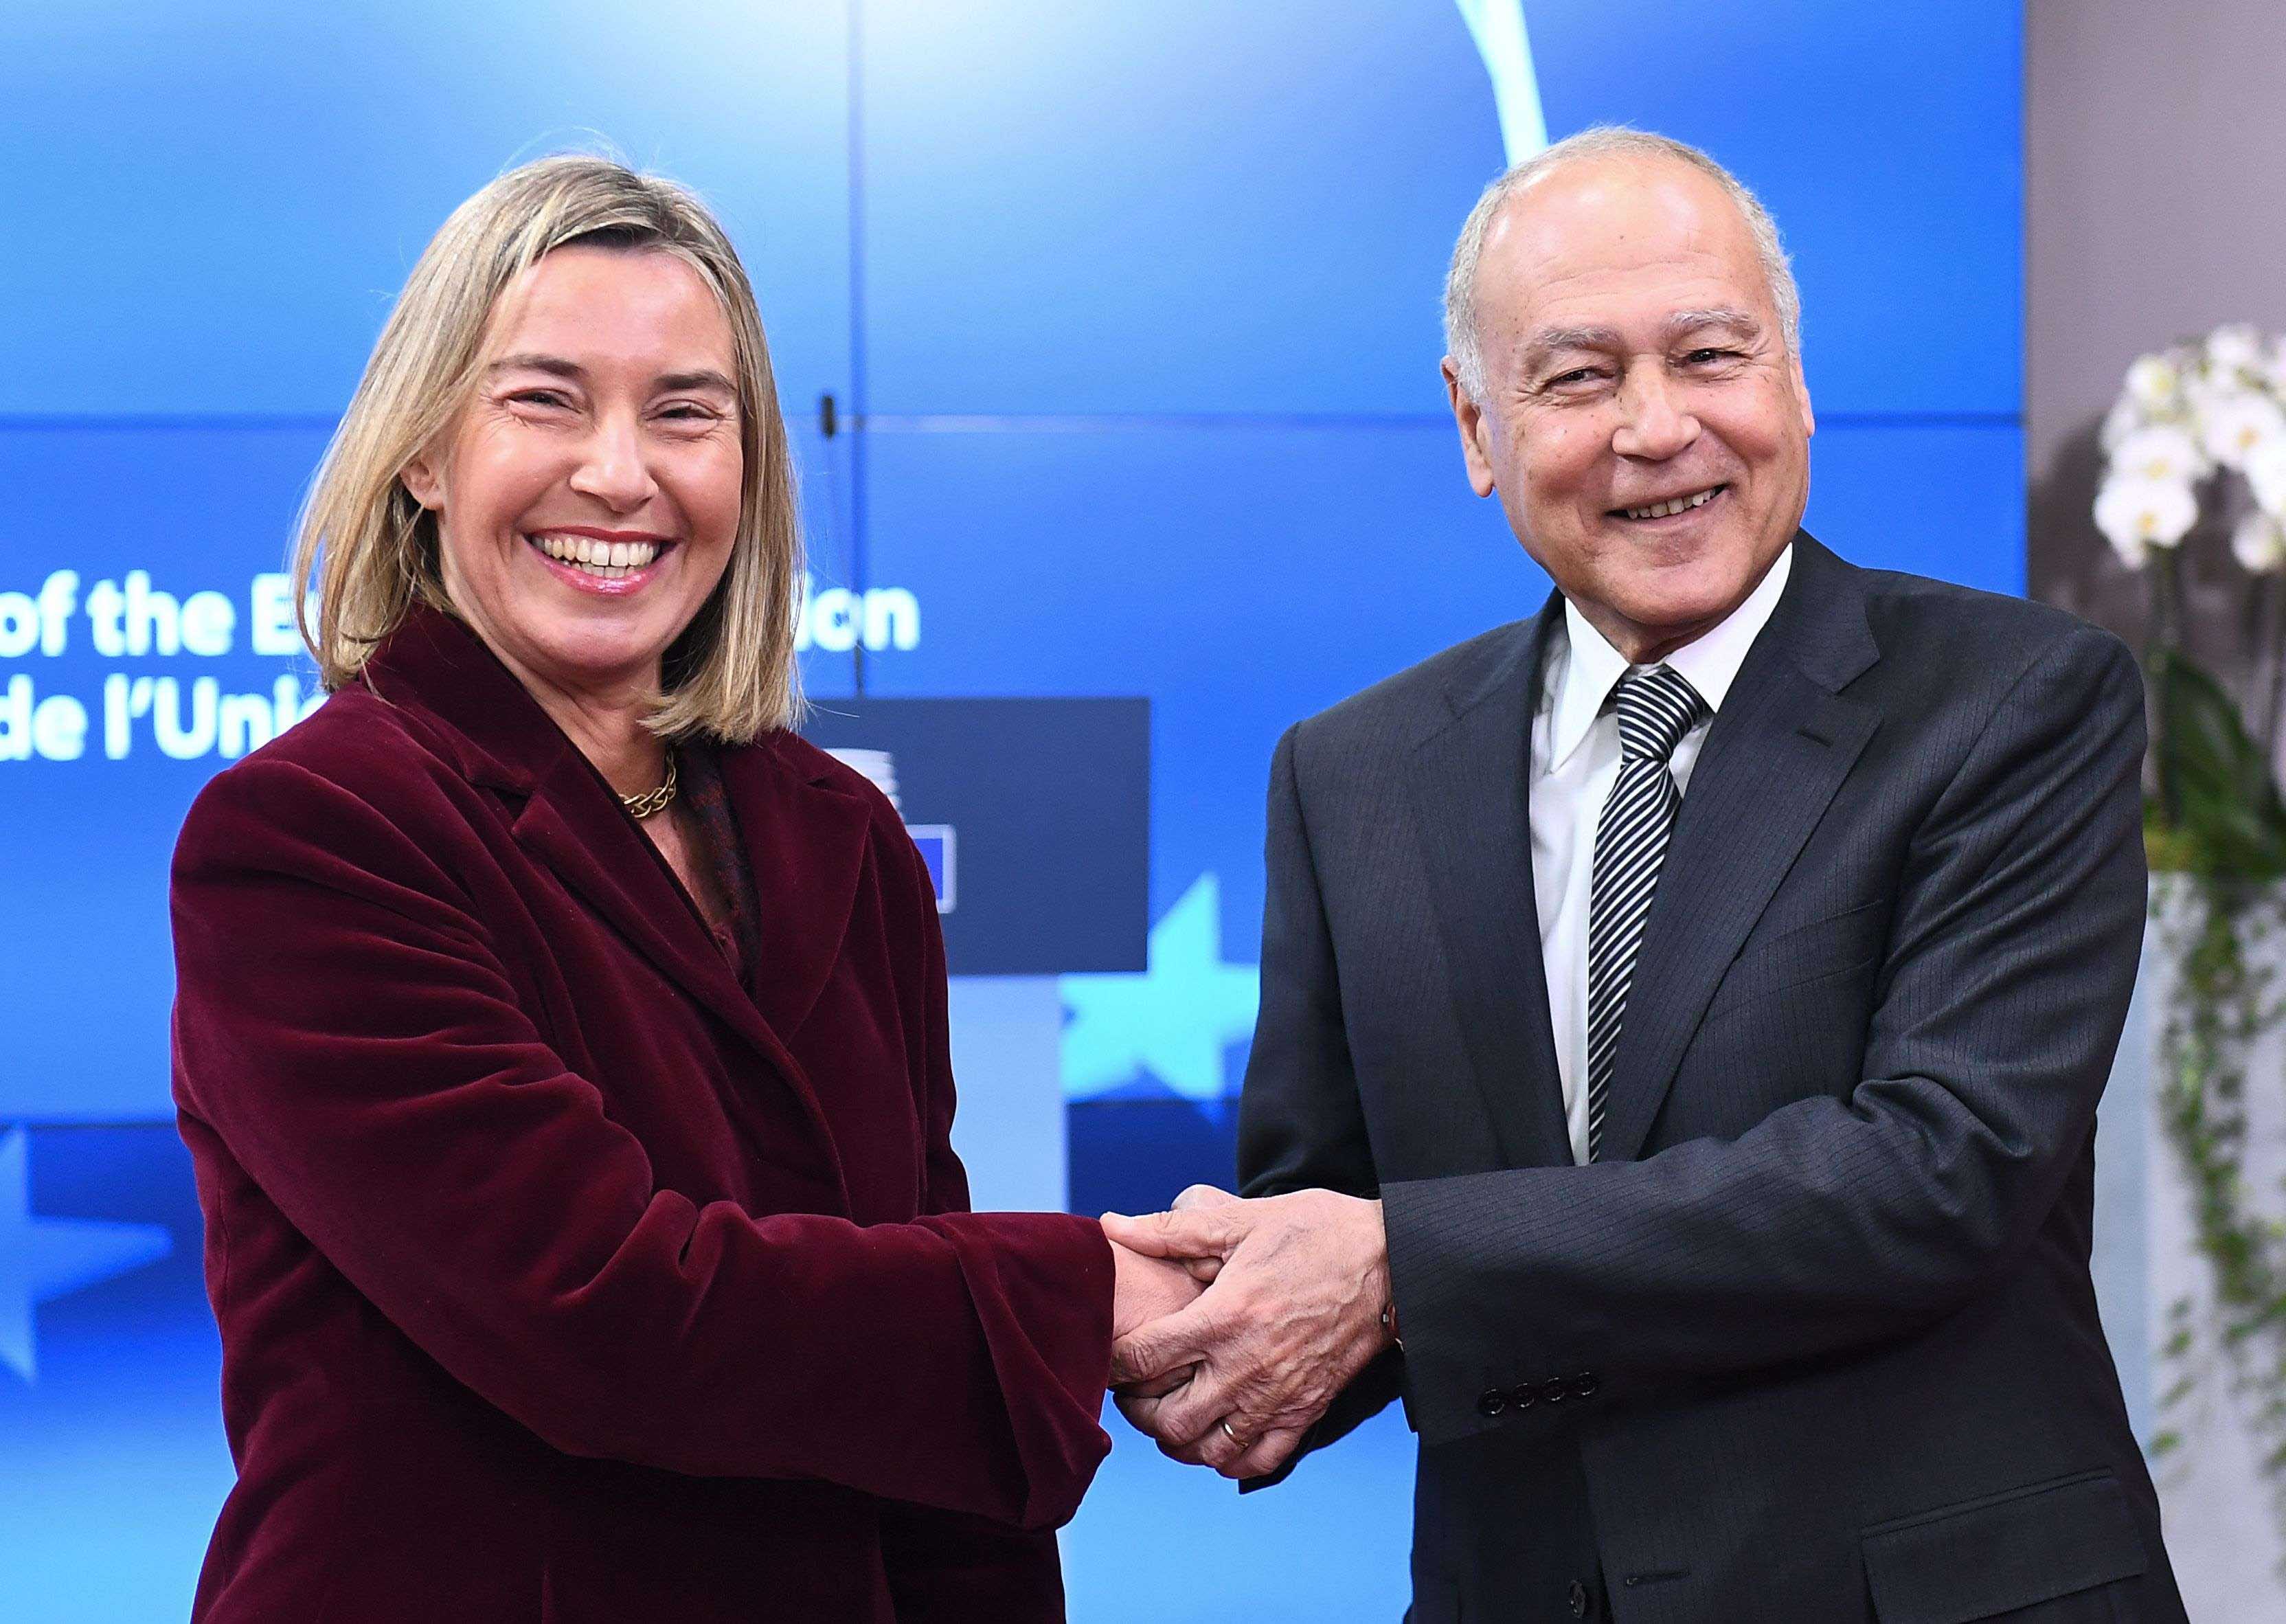  EU foreign policy chief Federica Mogherini (L) welcomes Arab League Secretary-General Ahmed Abul Gheit Ahmed Abul Gheit during a Foreign Affairs council at the European Council in Brussels, on February 26, 2018